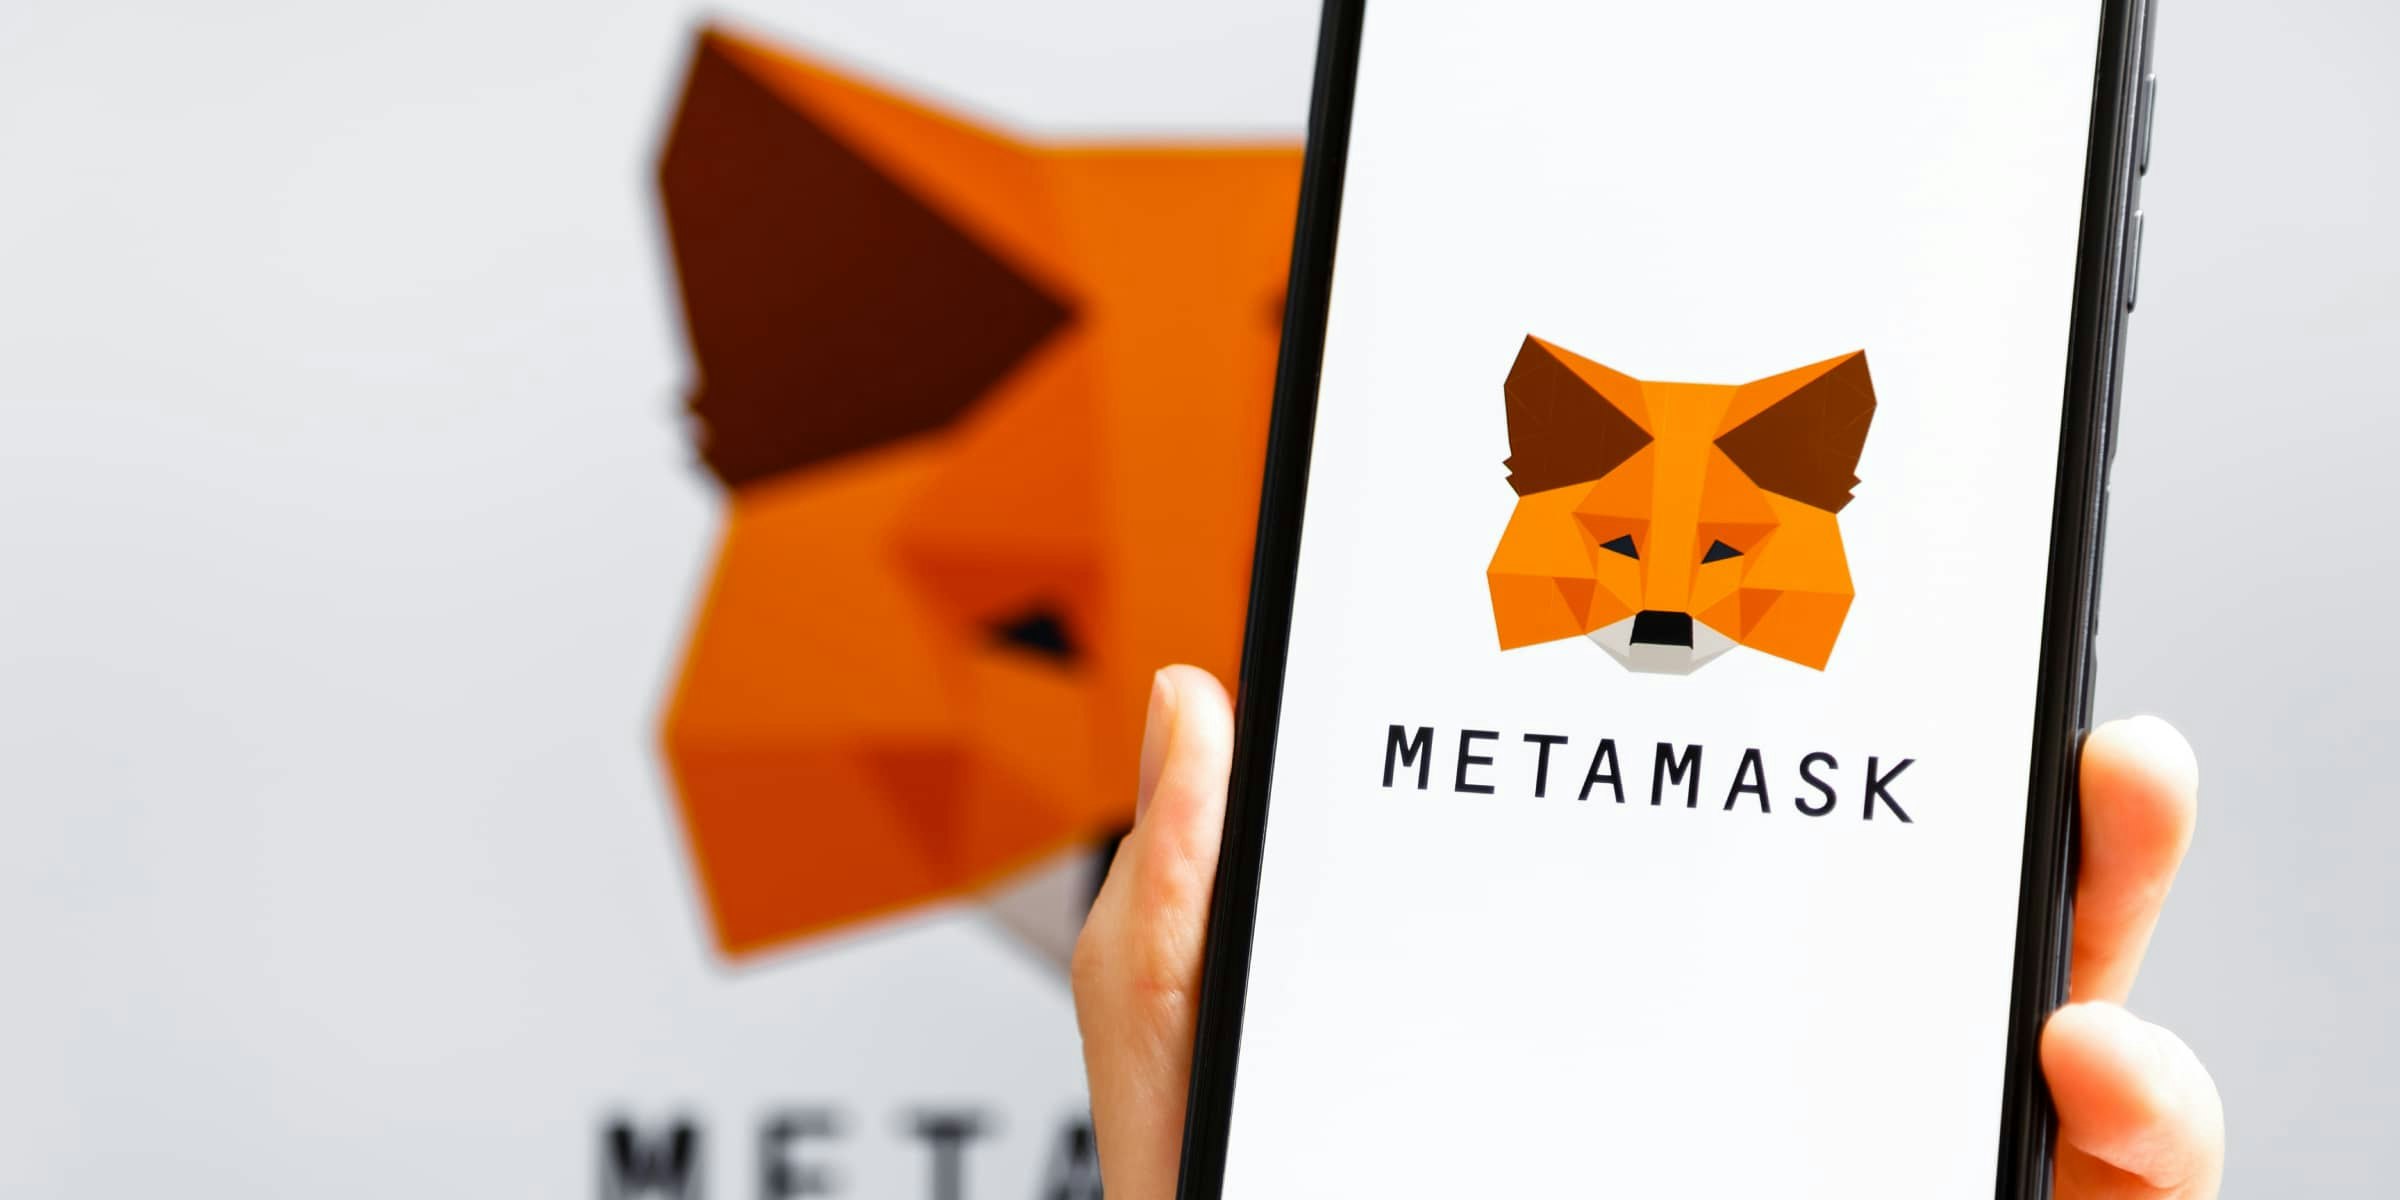 MetaMask: What you need to know